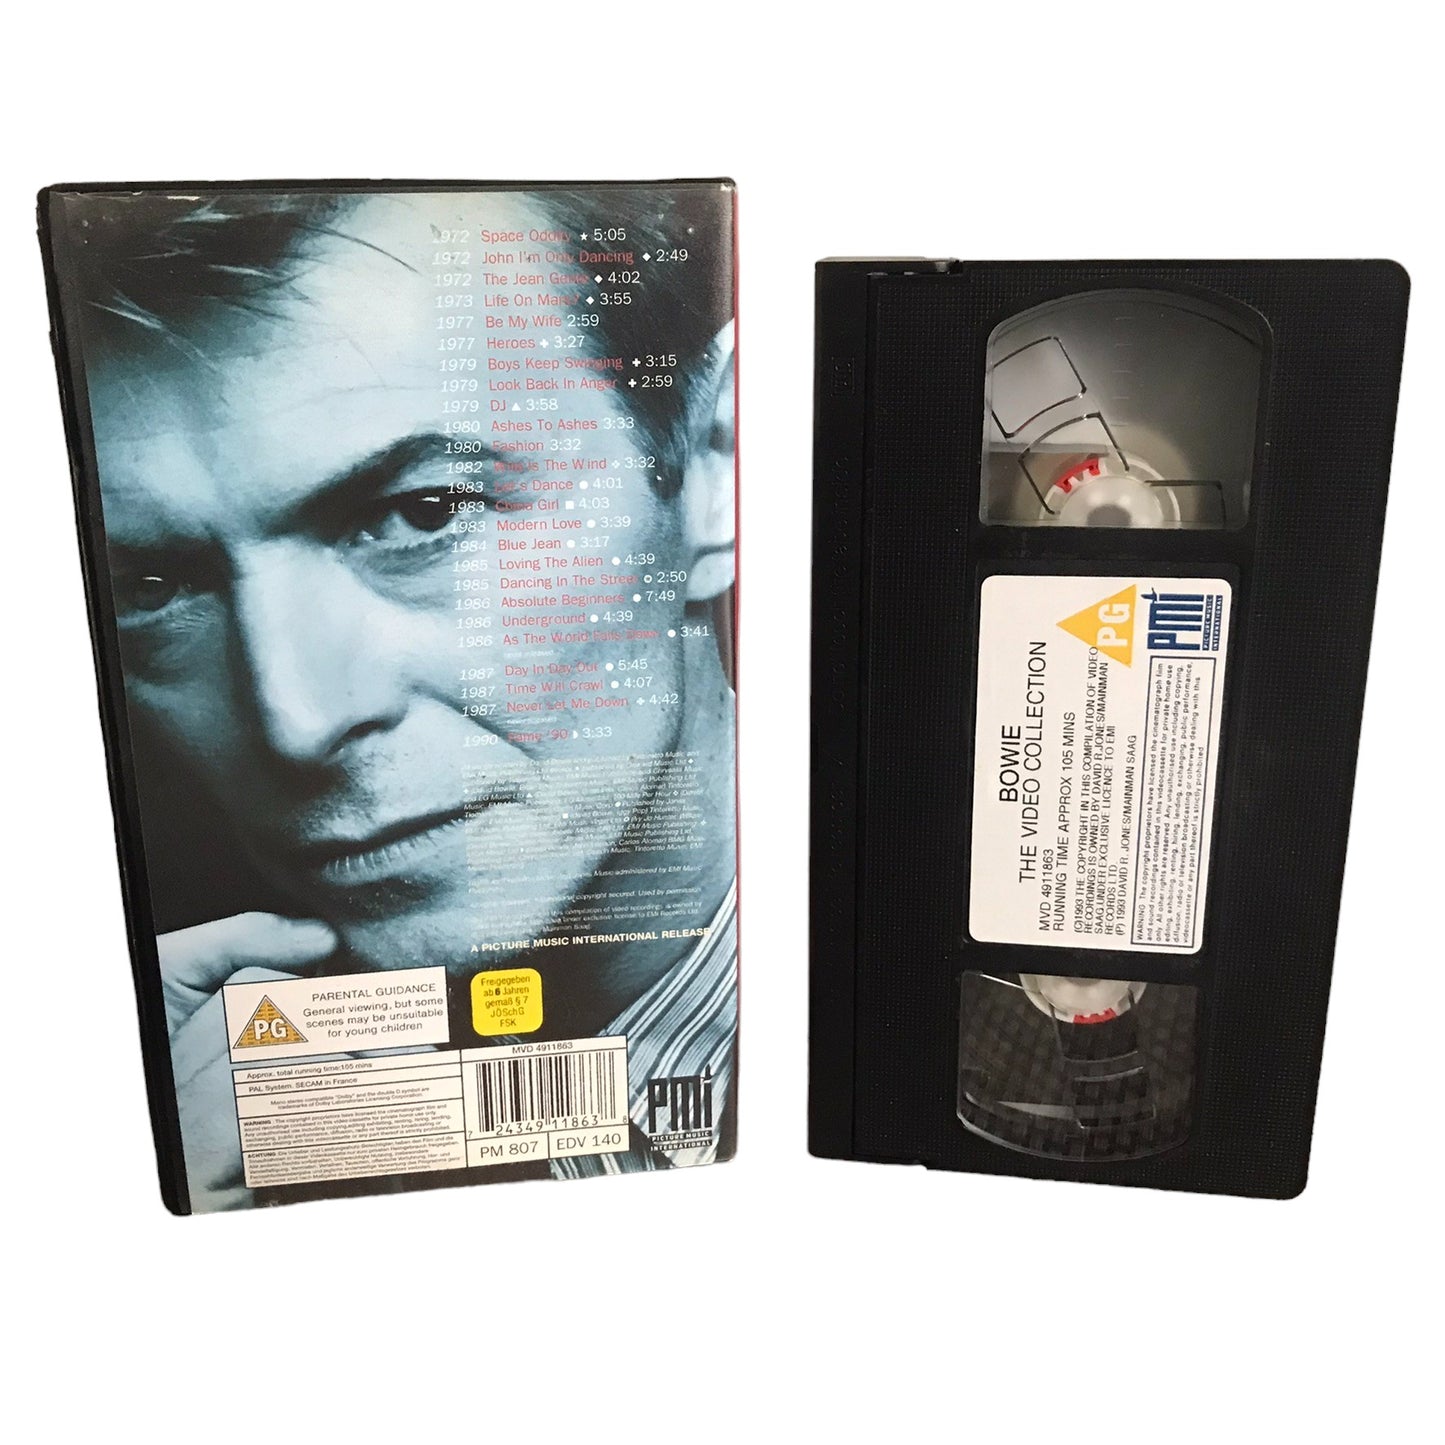 Bowie The Video Collection - Steven Berkoff - PMI - Music - Pal - VHS-